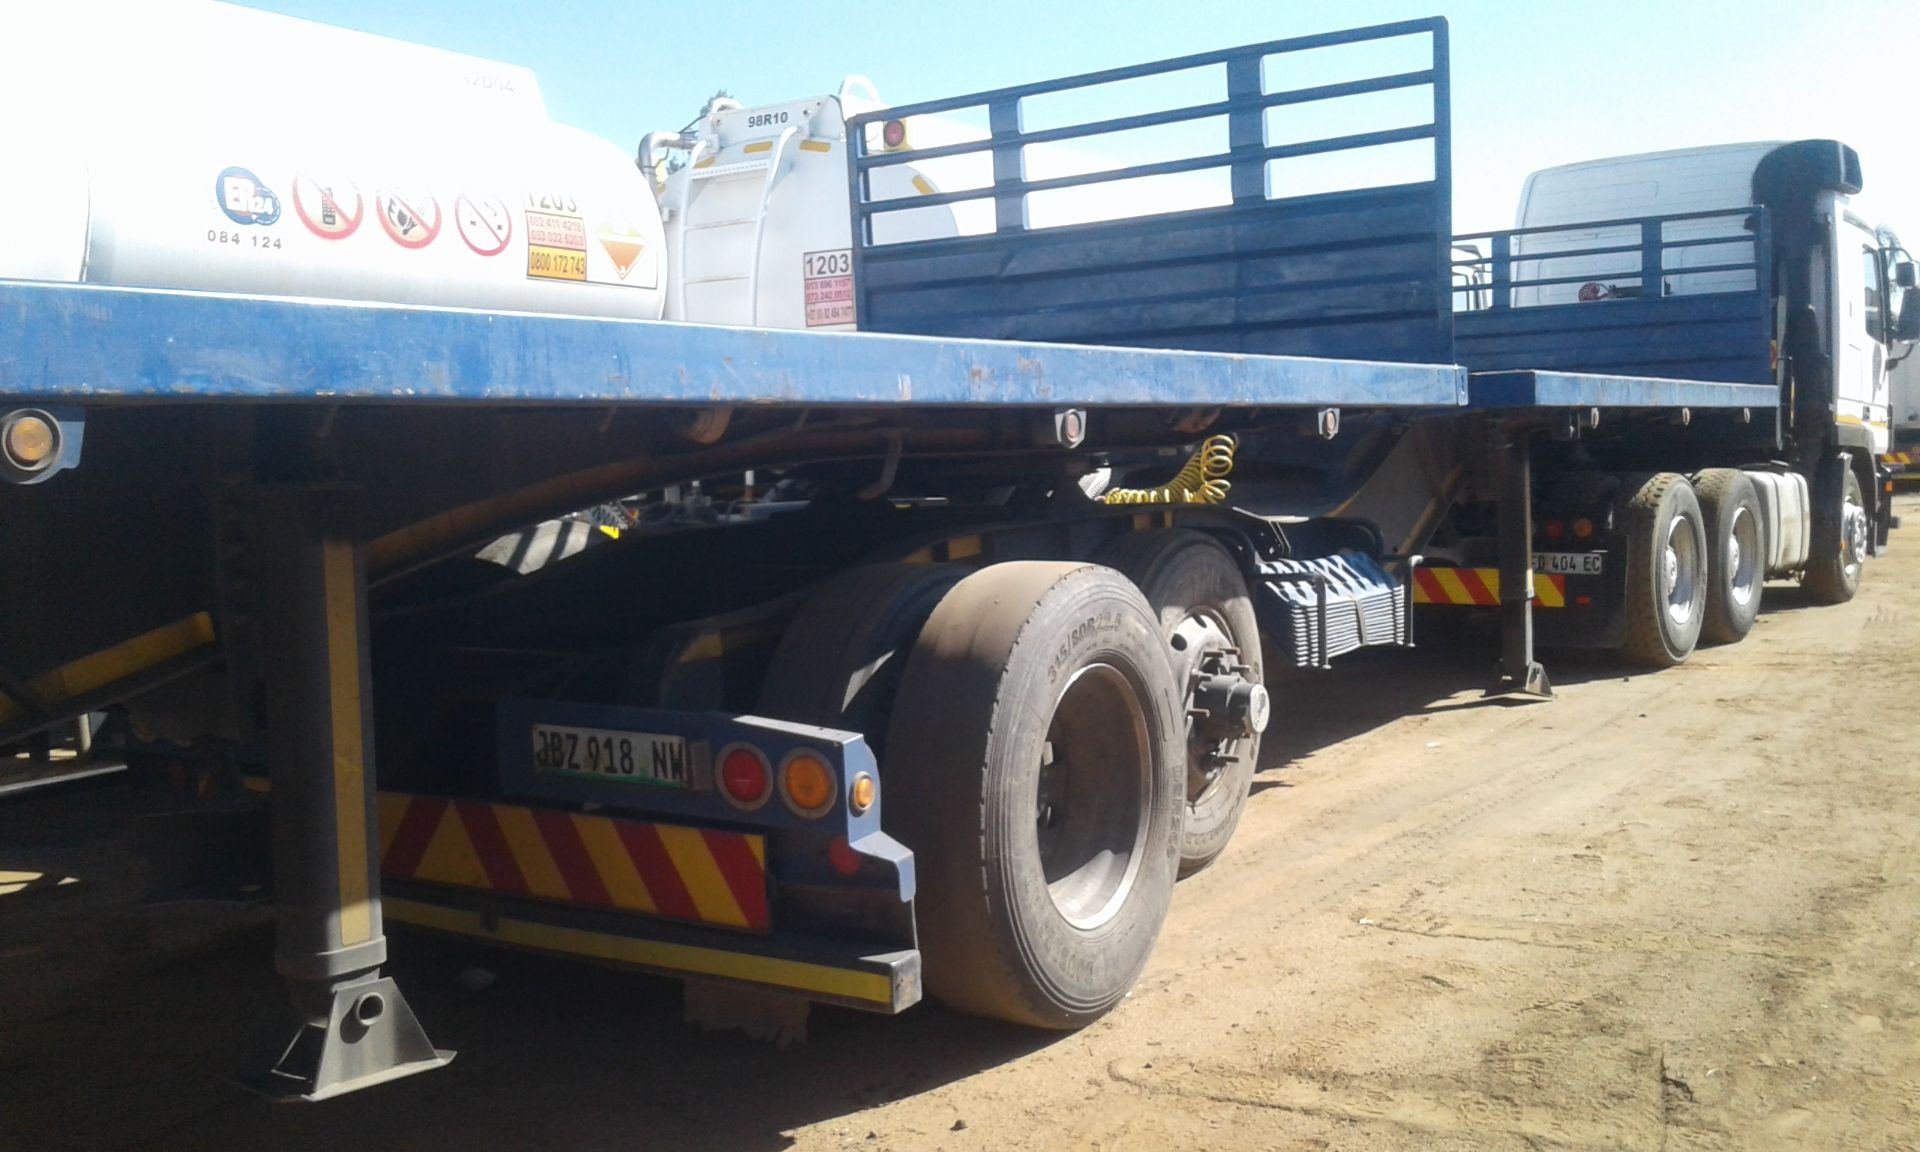 2013 TRAILORD SA SUPERLINK F/DECK TRAILER - (JBZ918NW / JBZ920NW) - Image 2 of 7